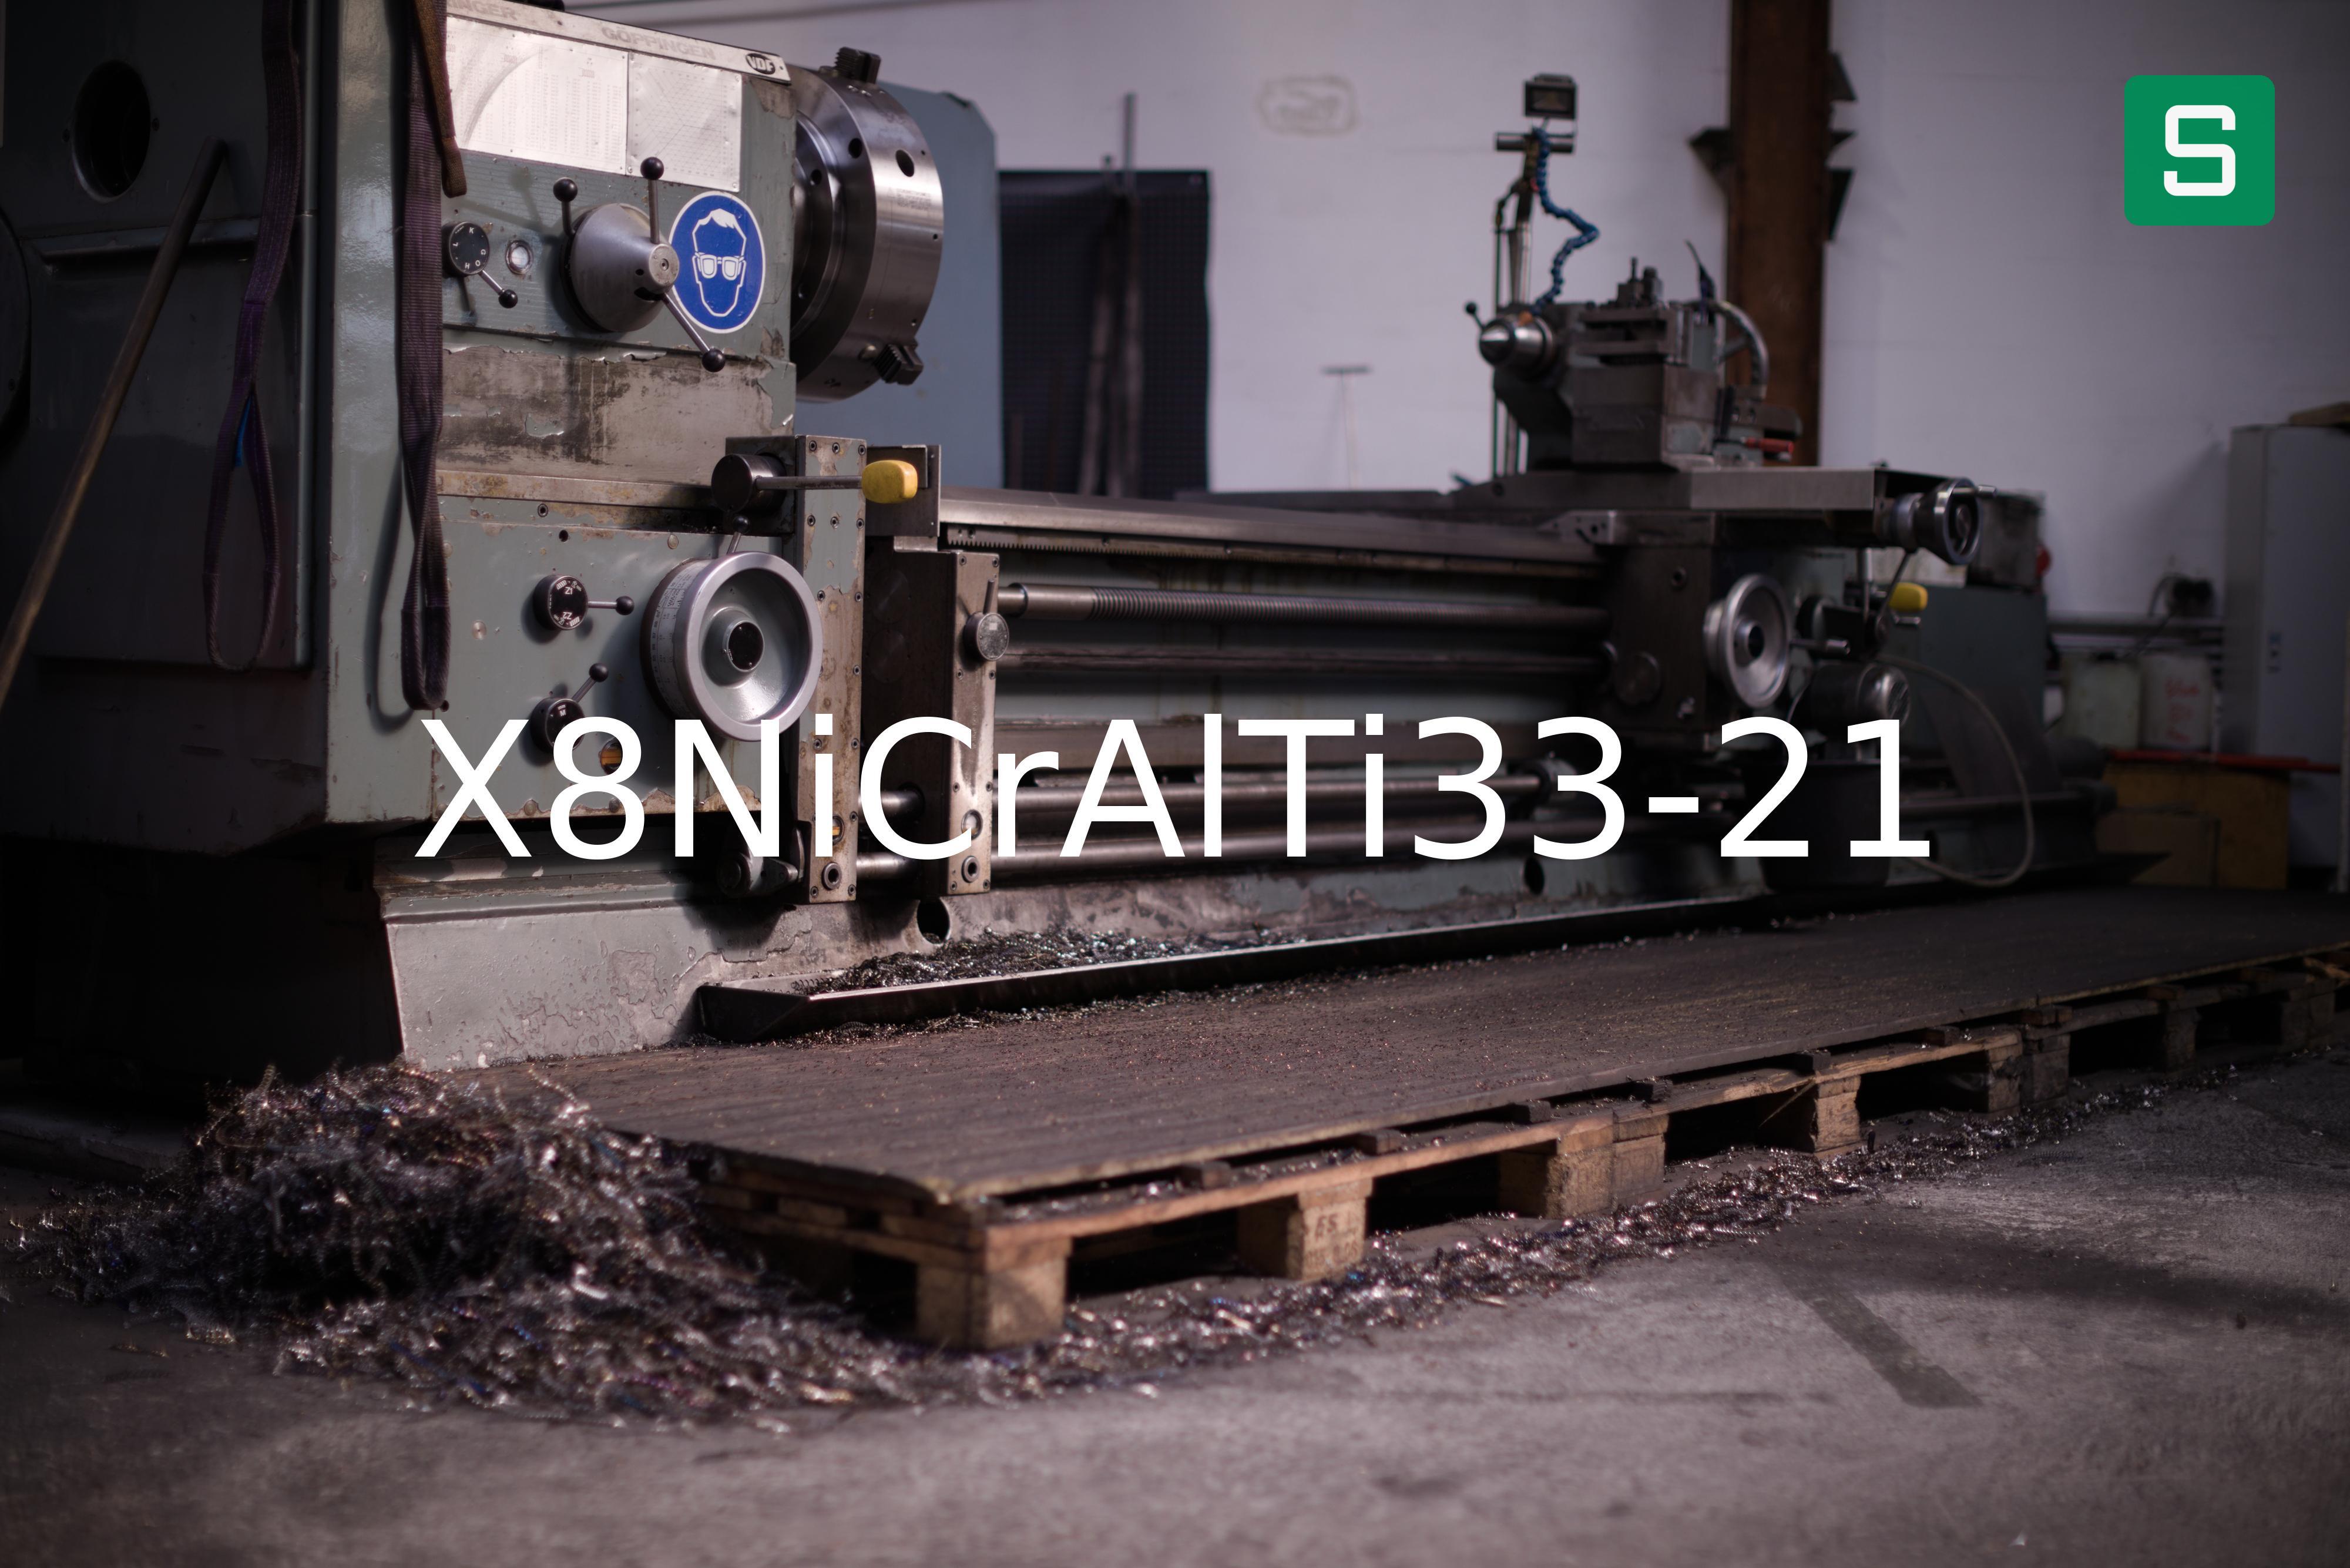 Steel Material: X8NiCrAlTi33-21